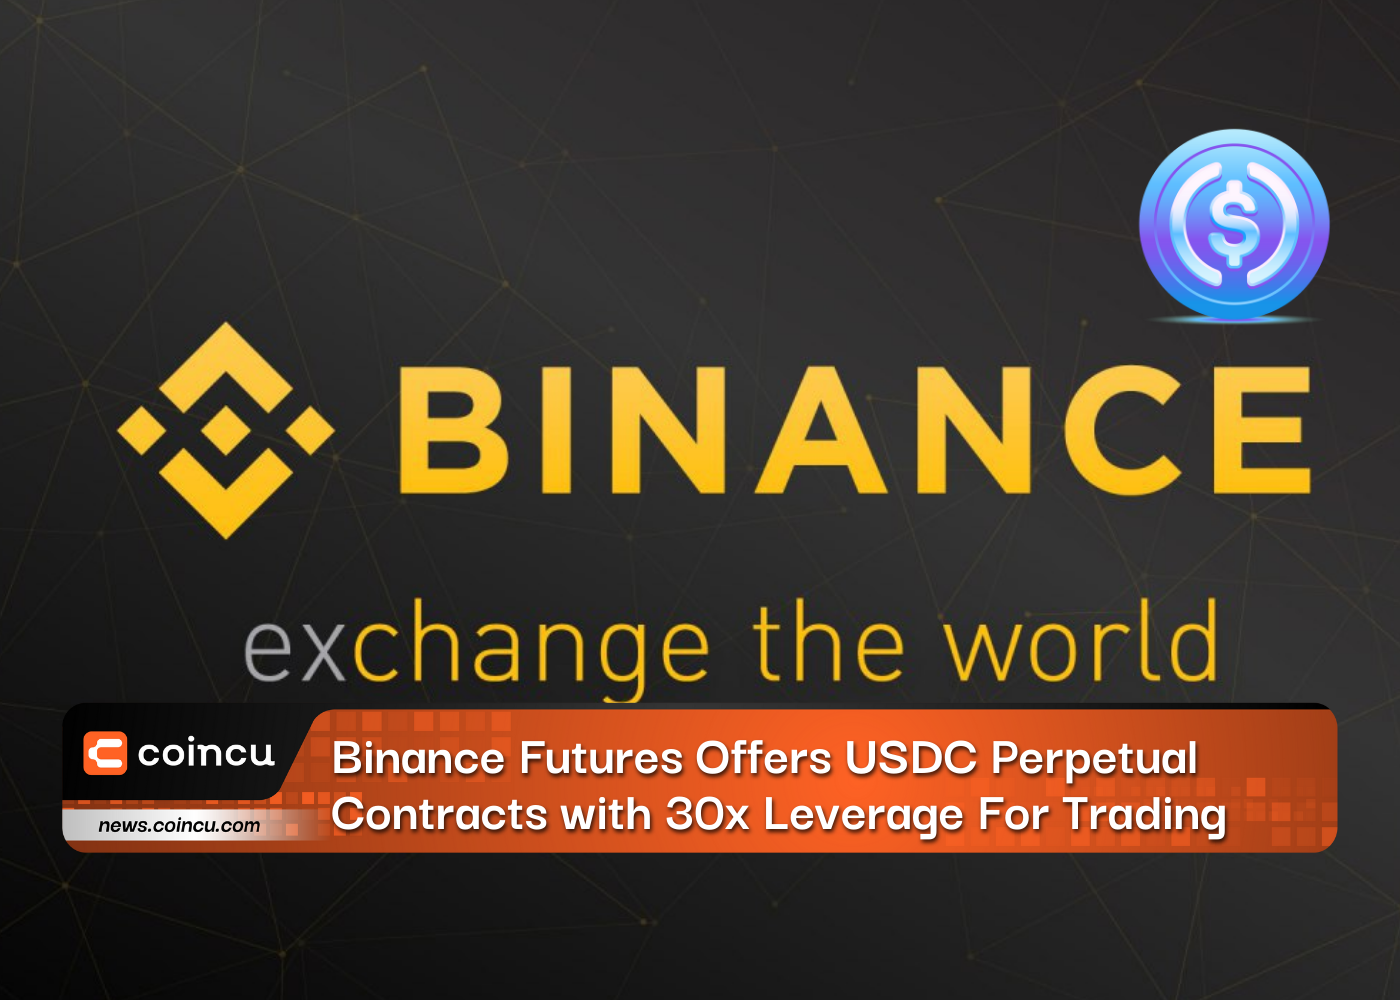 Binance Futures Offers USDC Perpetual Contracts with 30x Leverage For Trading